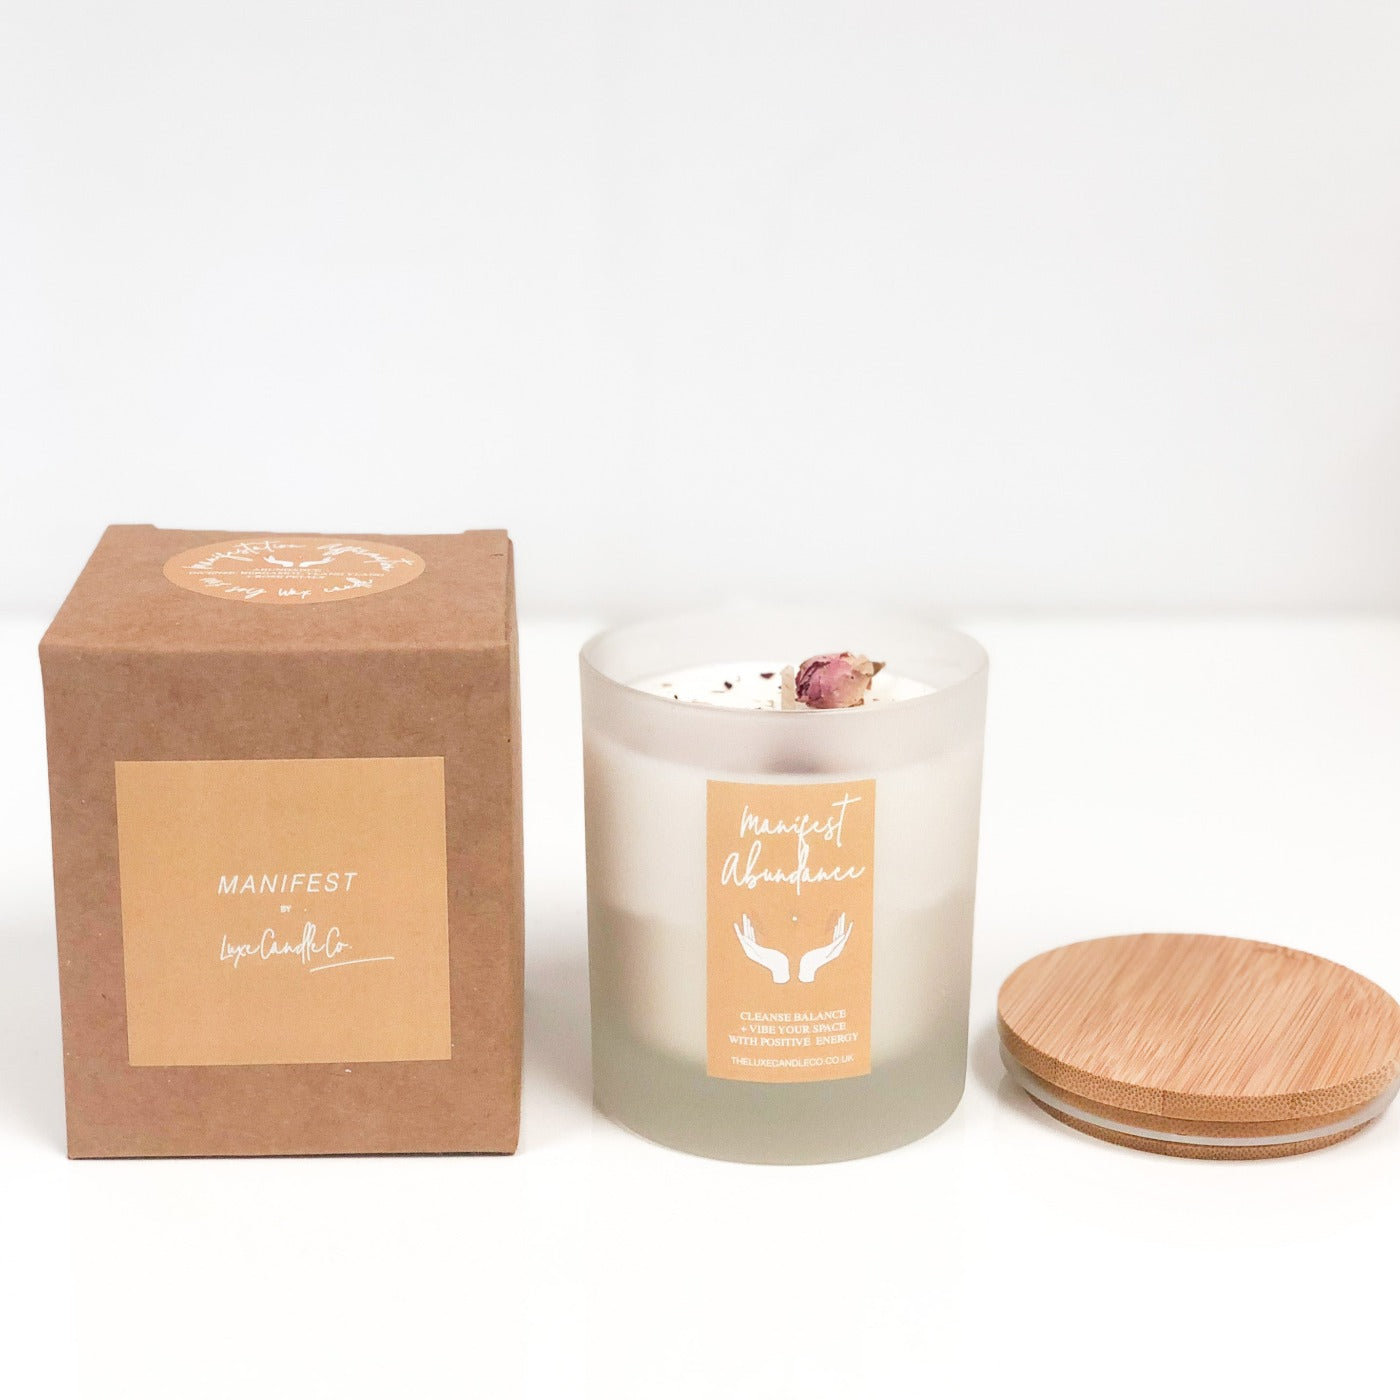 Attract abundance with a manifestation candle to attract wealth, abundance prosperity | The Luxe Candle Co